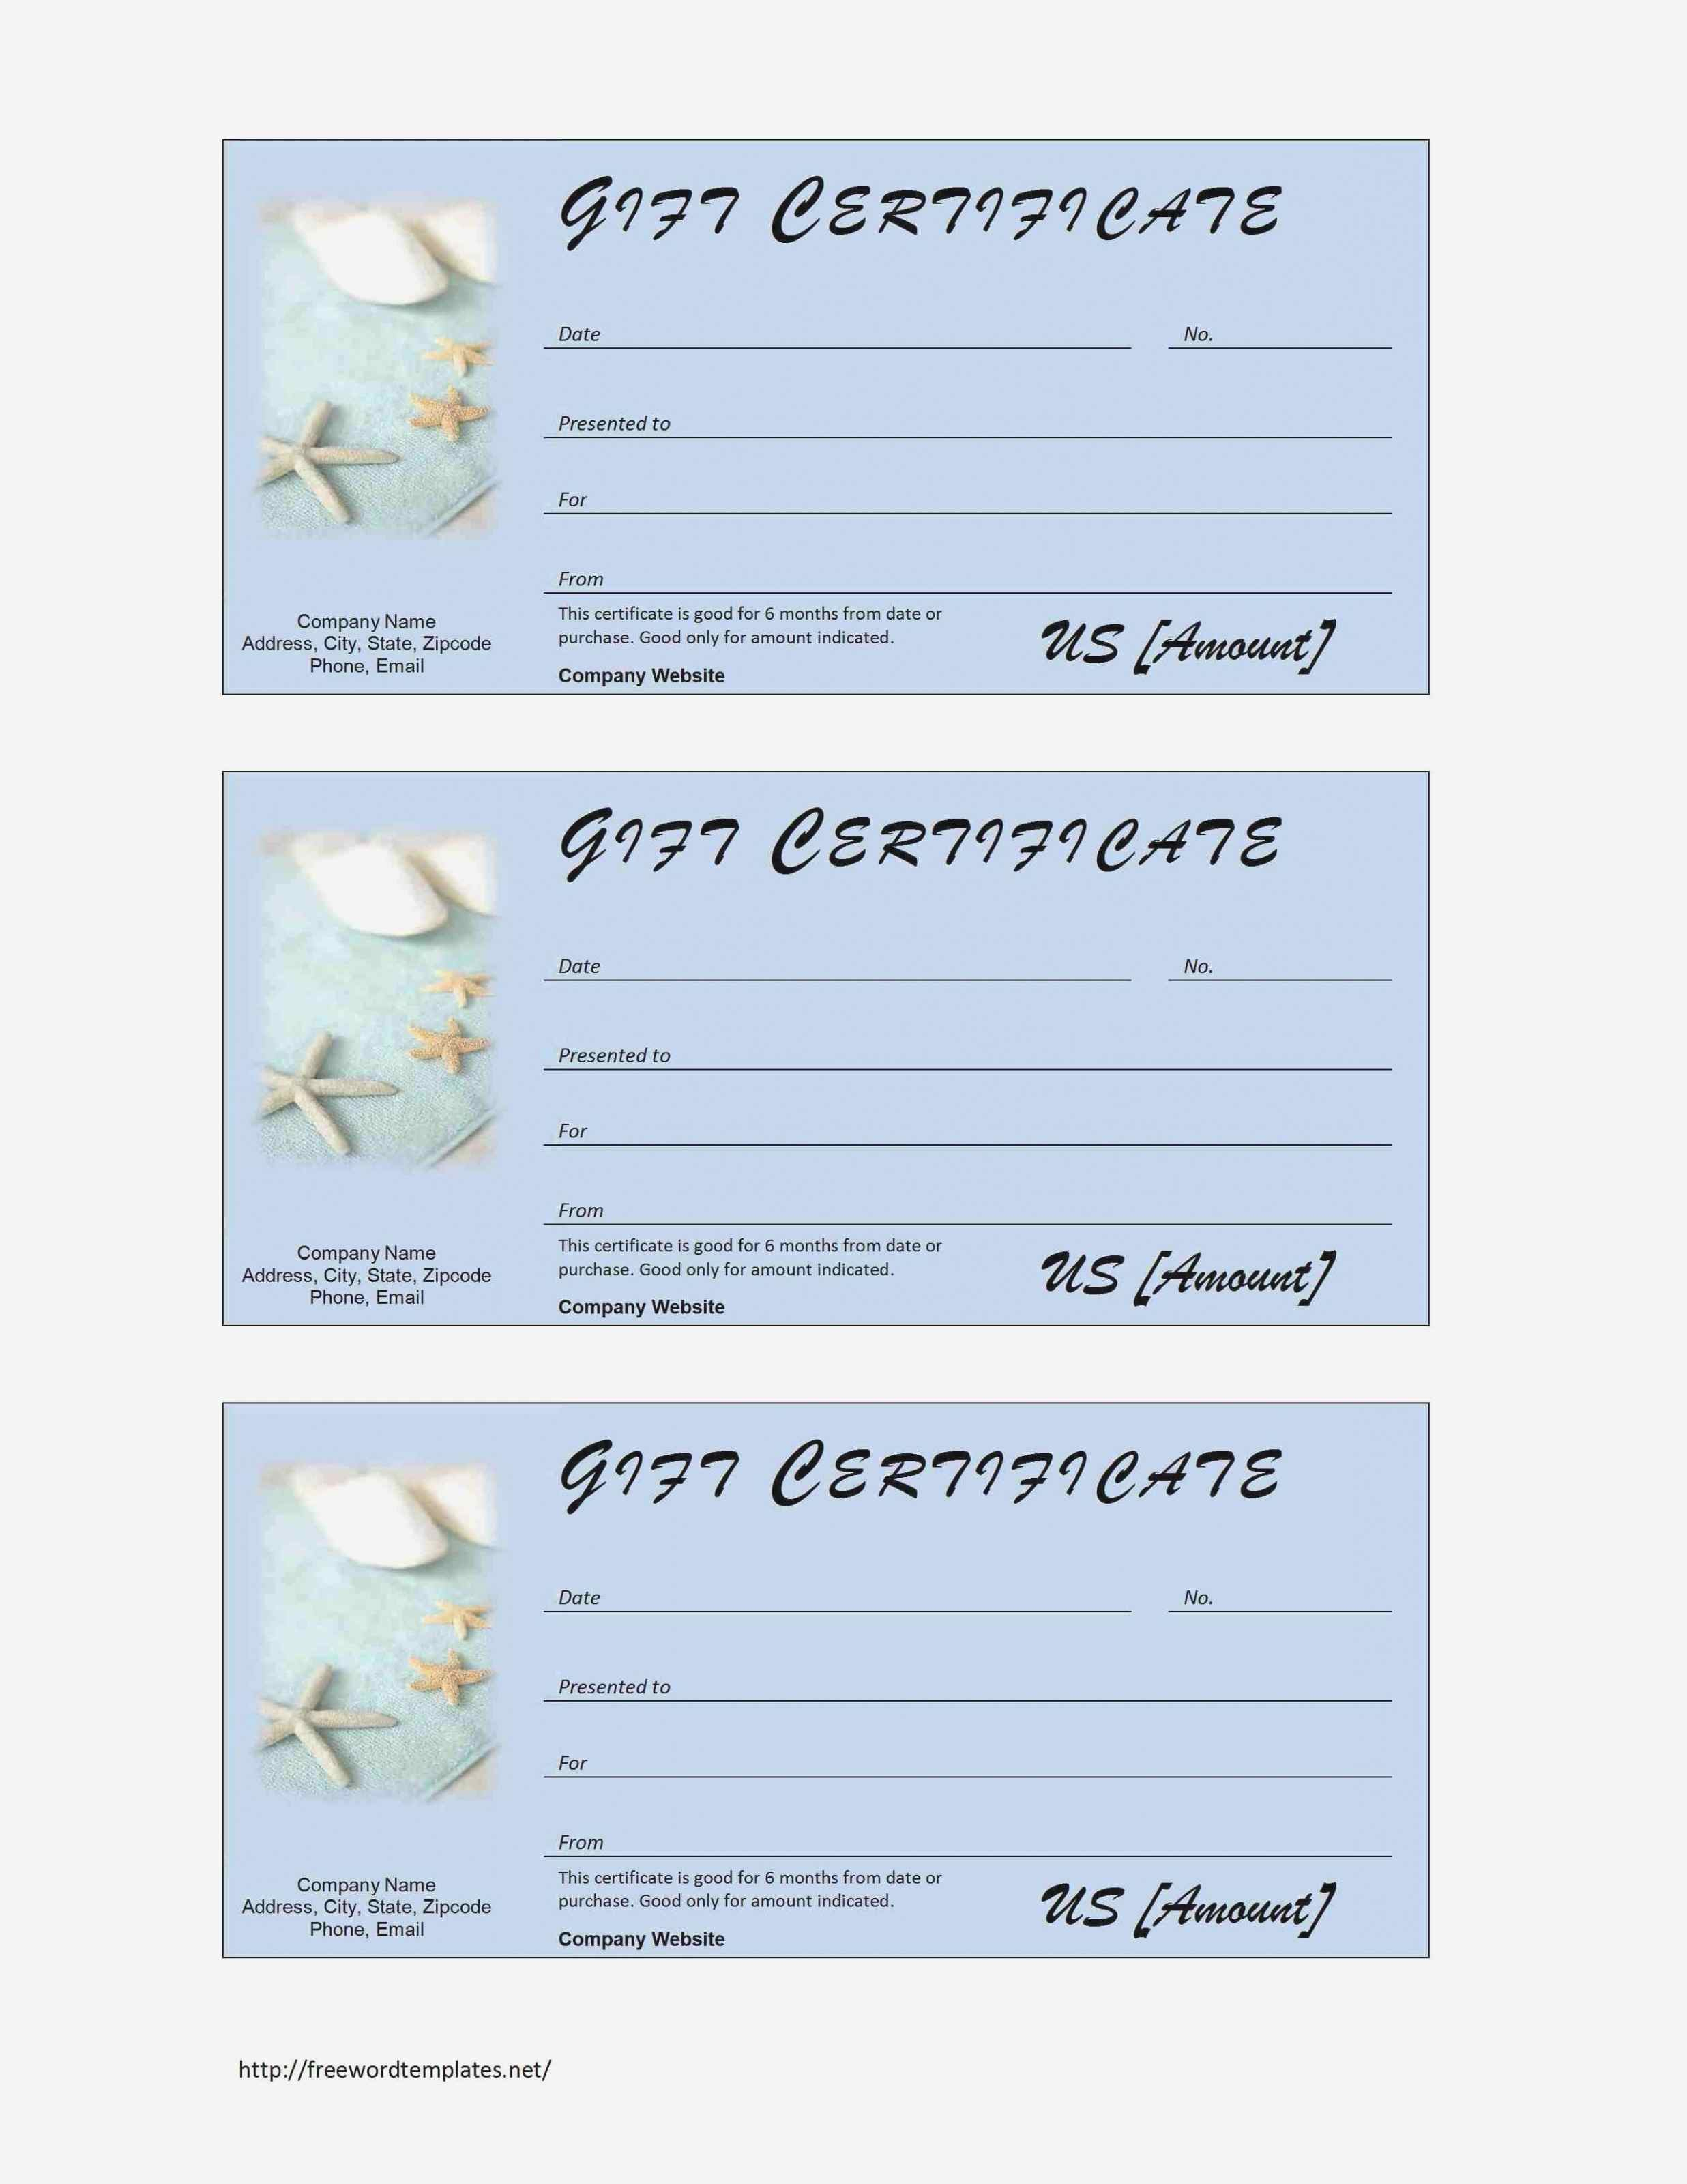 Free Printable Massage Gift Certificates - Classy World - Free Printable Gift Certificate Templates For Massage